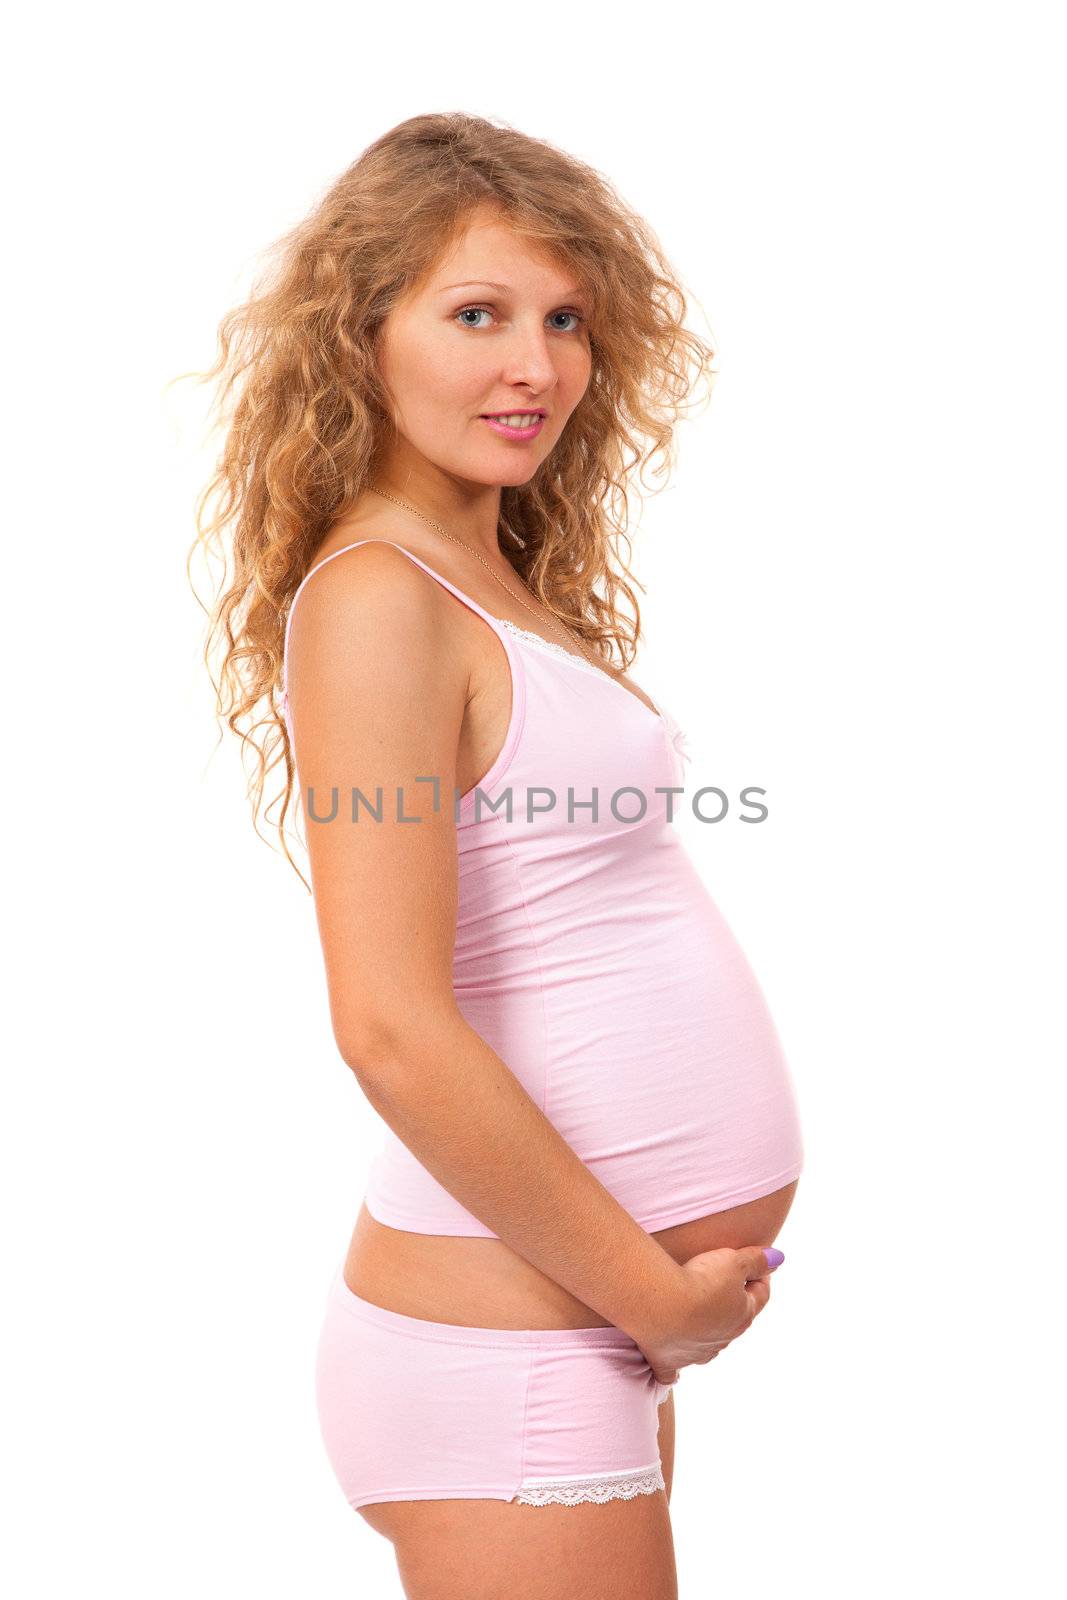 Pregnant woman is caressing her belly by bloodua